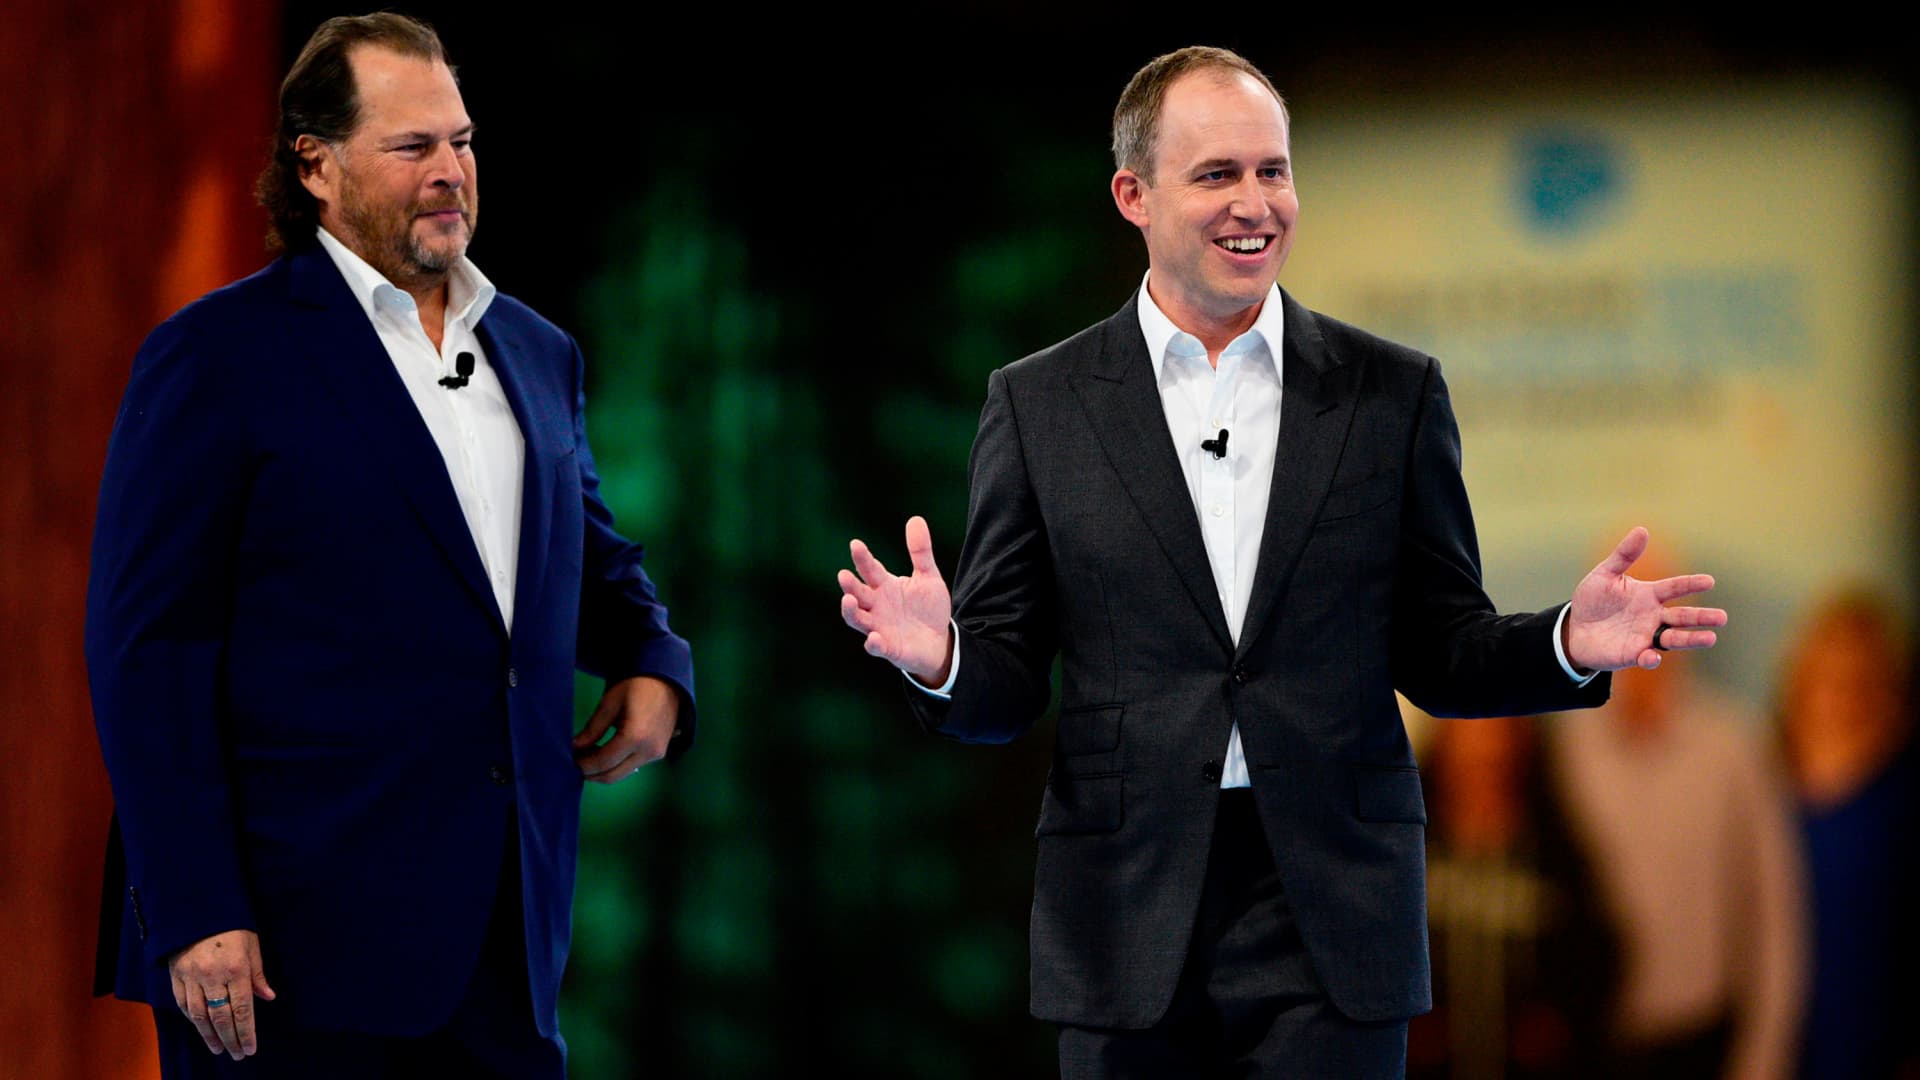 Bret Taylor steps down as co-CEO of Salesforce, leaving Marc Benioff alone at the helm